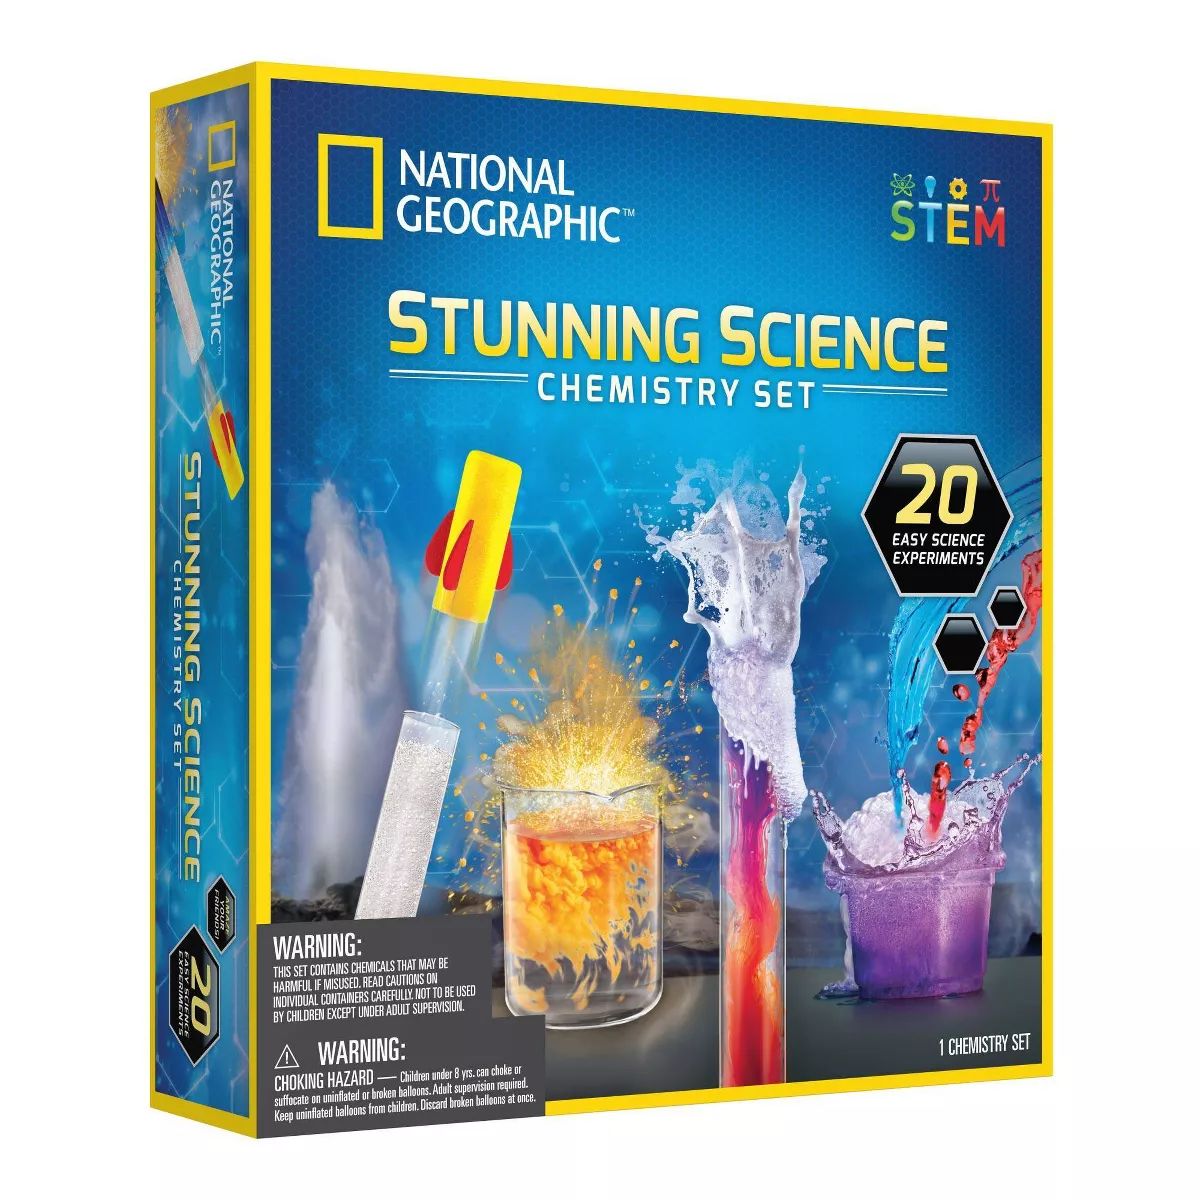 National Geographic Stunning Science Chemistry Set | Target